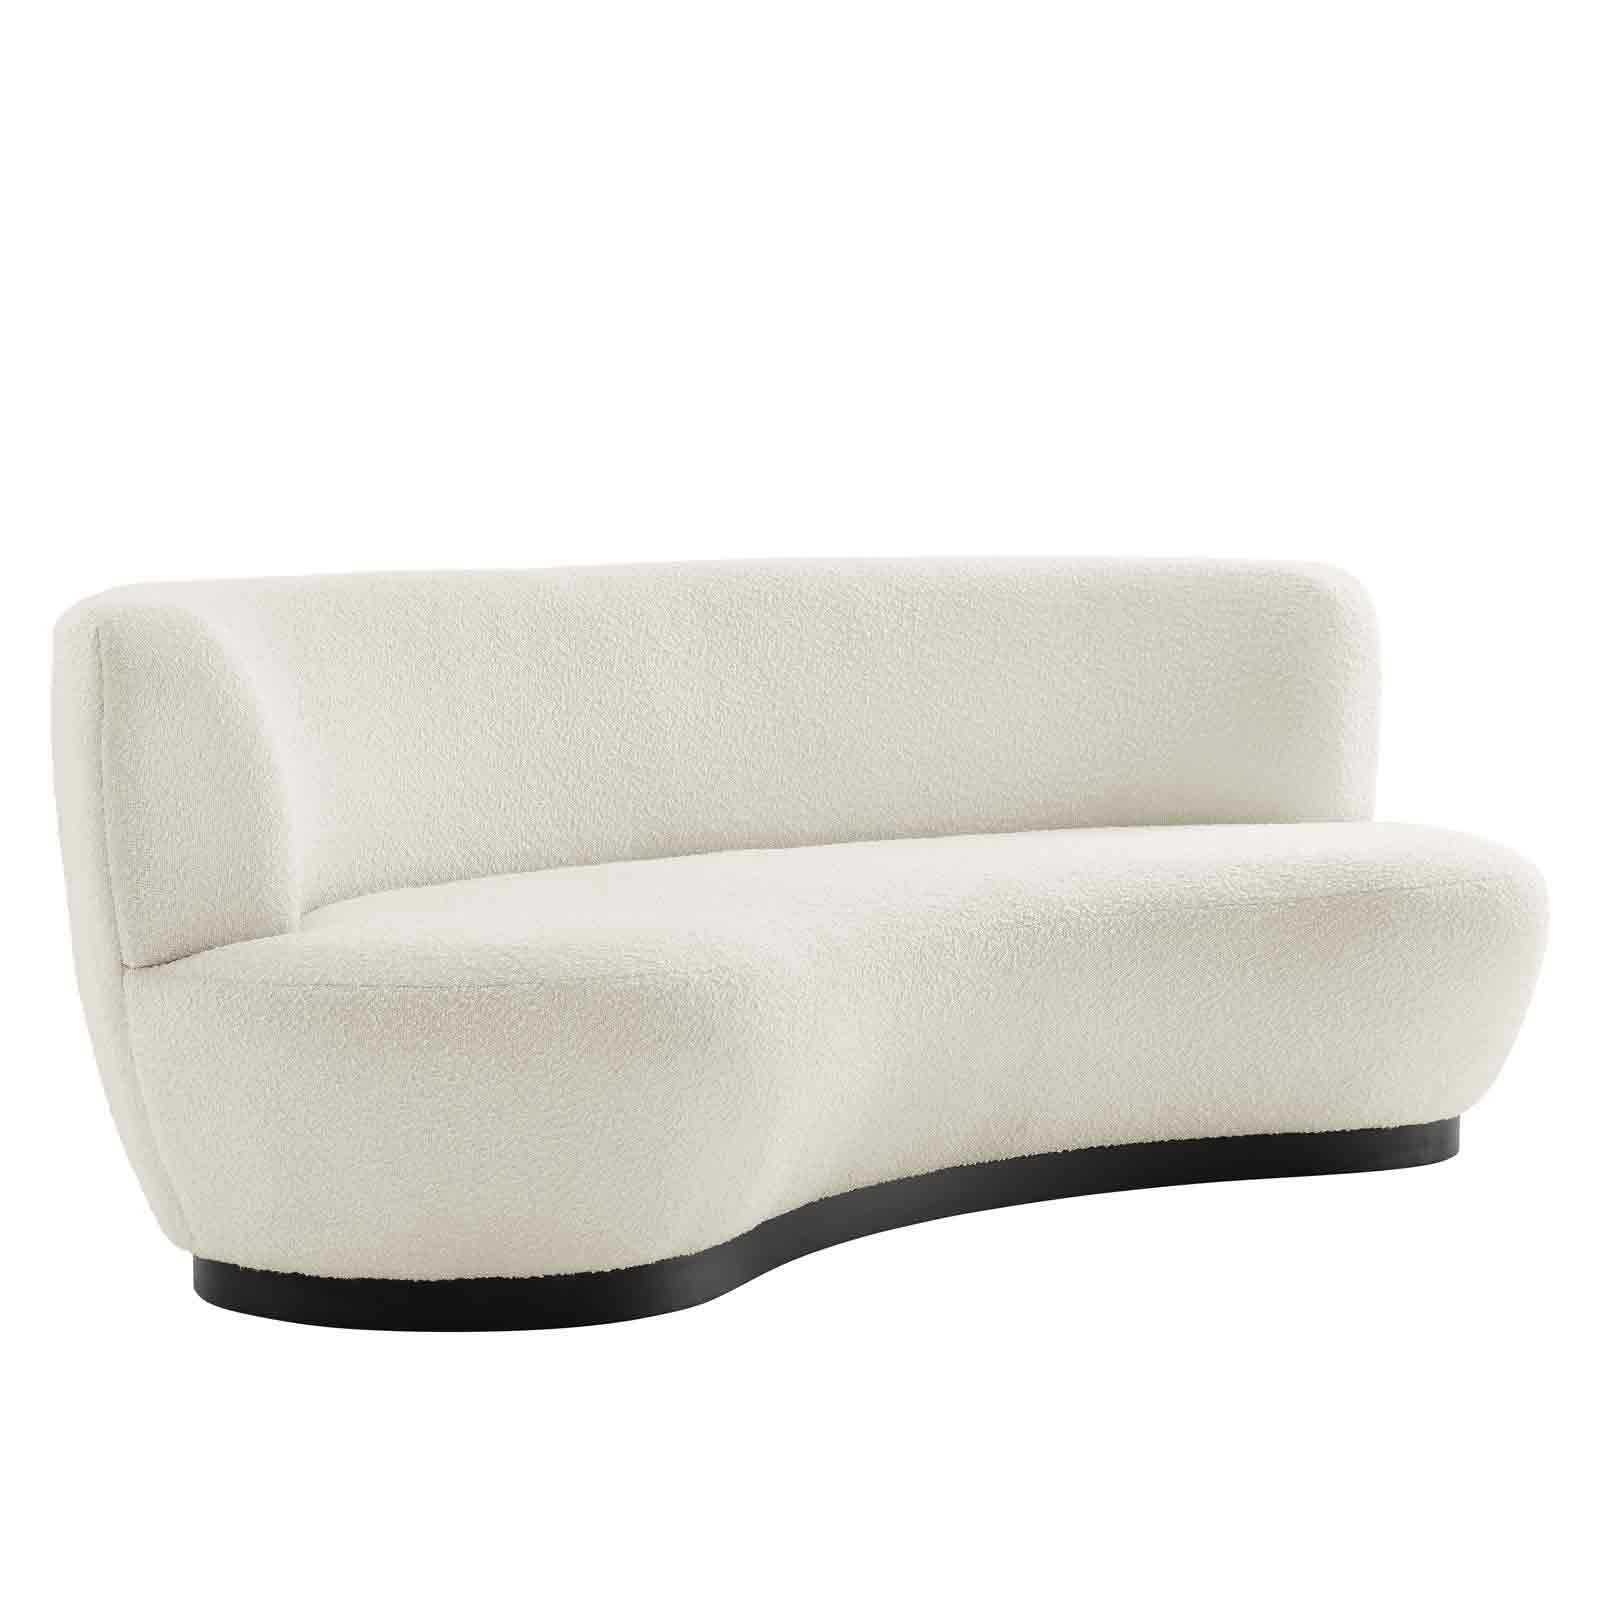 Kindred Upholstered Fabric Sofa in Black Ivory